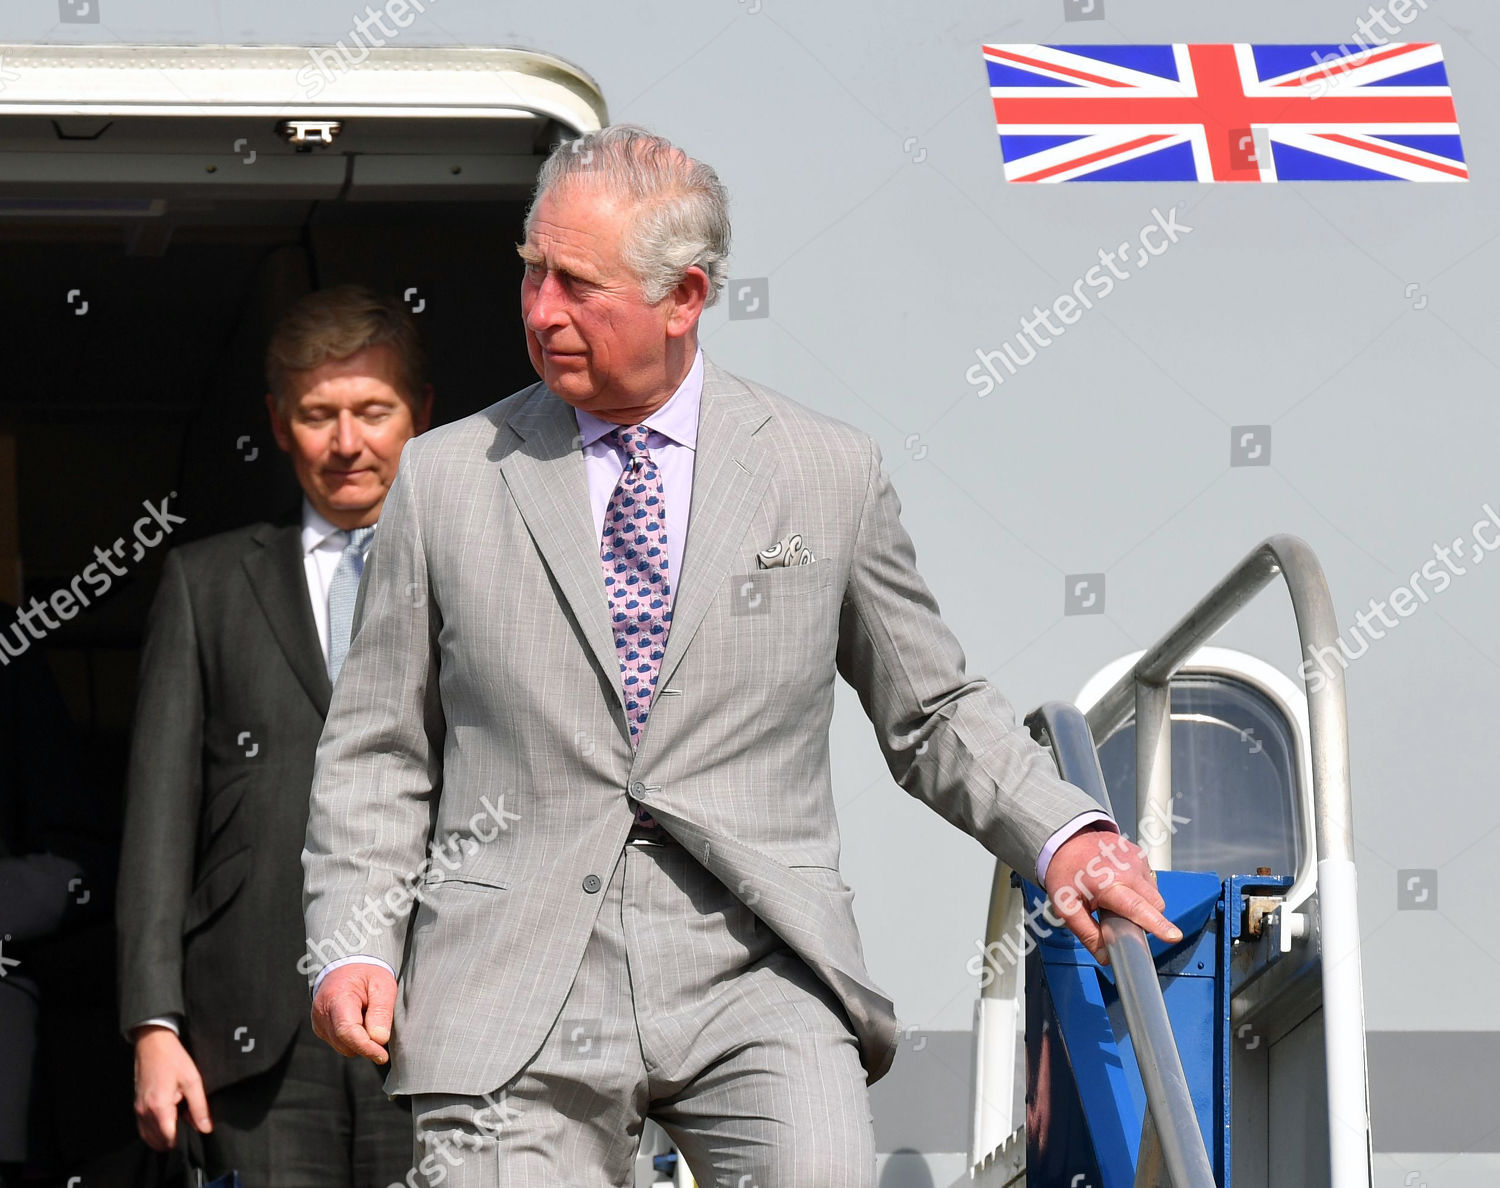 prince-charles-and-camilla-duchess-of-cornwall-caribbean-tour-st-lucia-shutterstock-editorial-10158713k.jpg